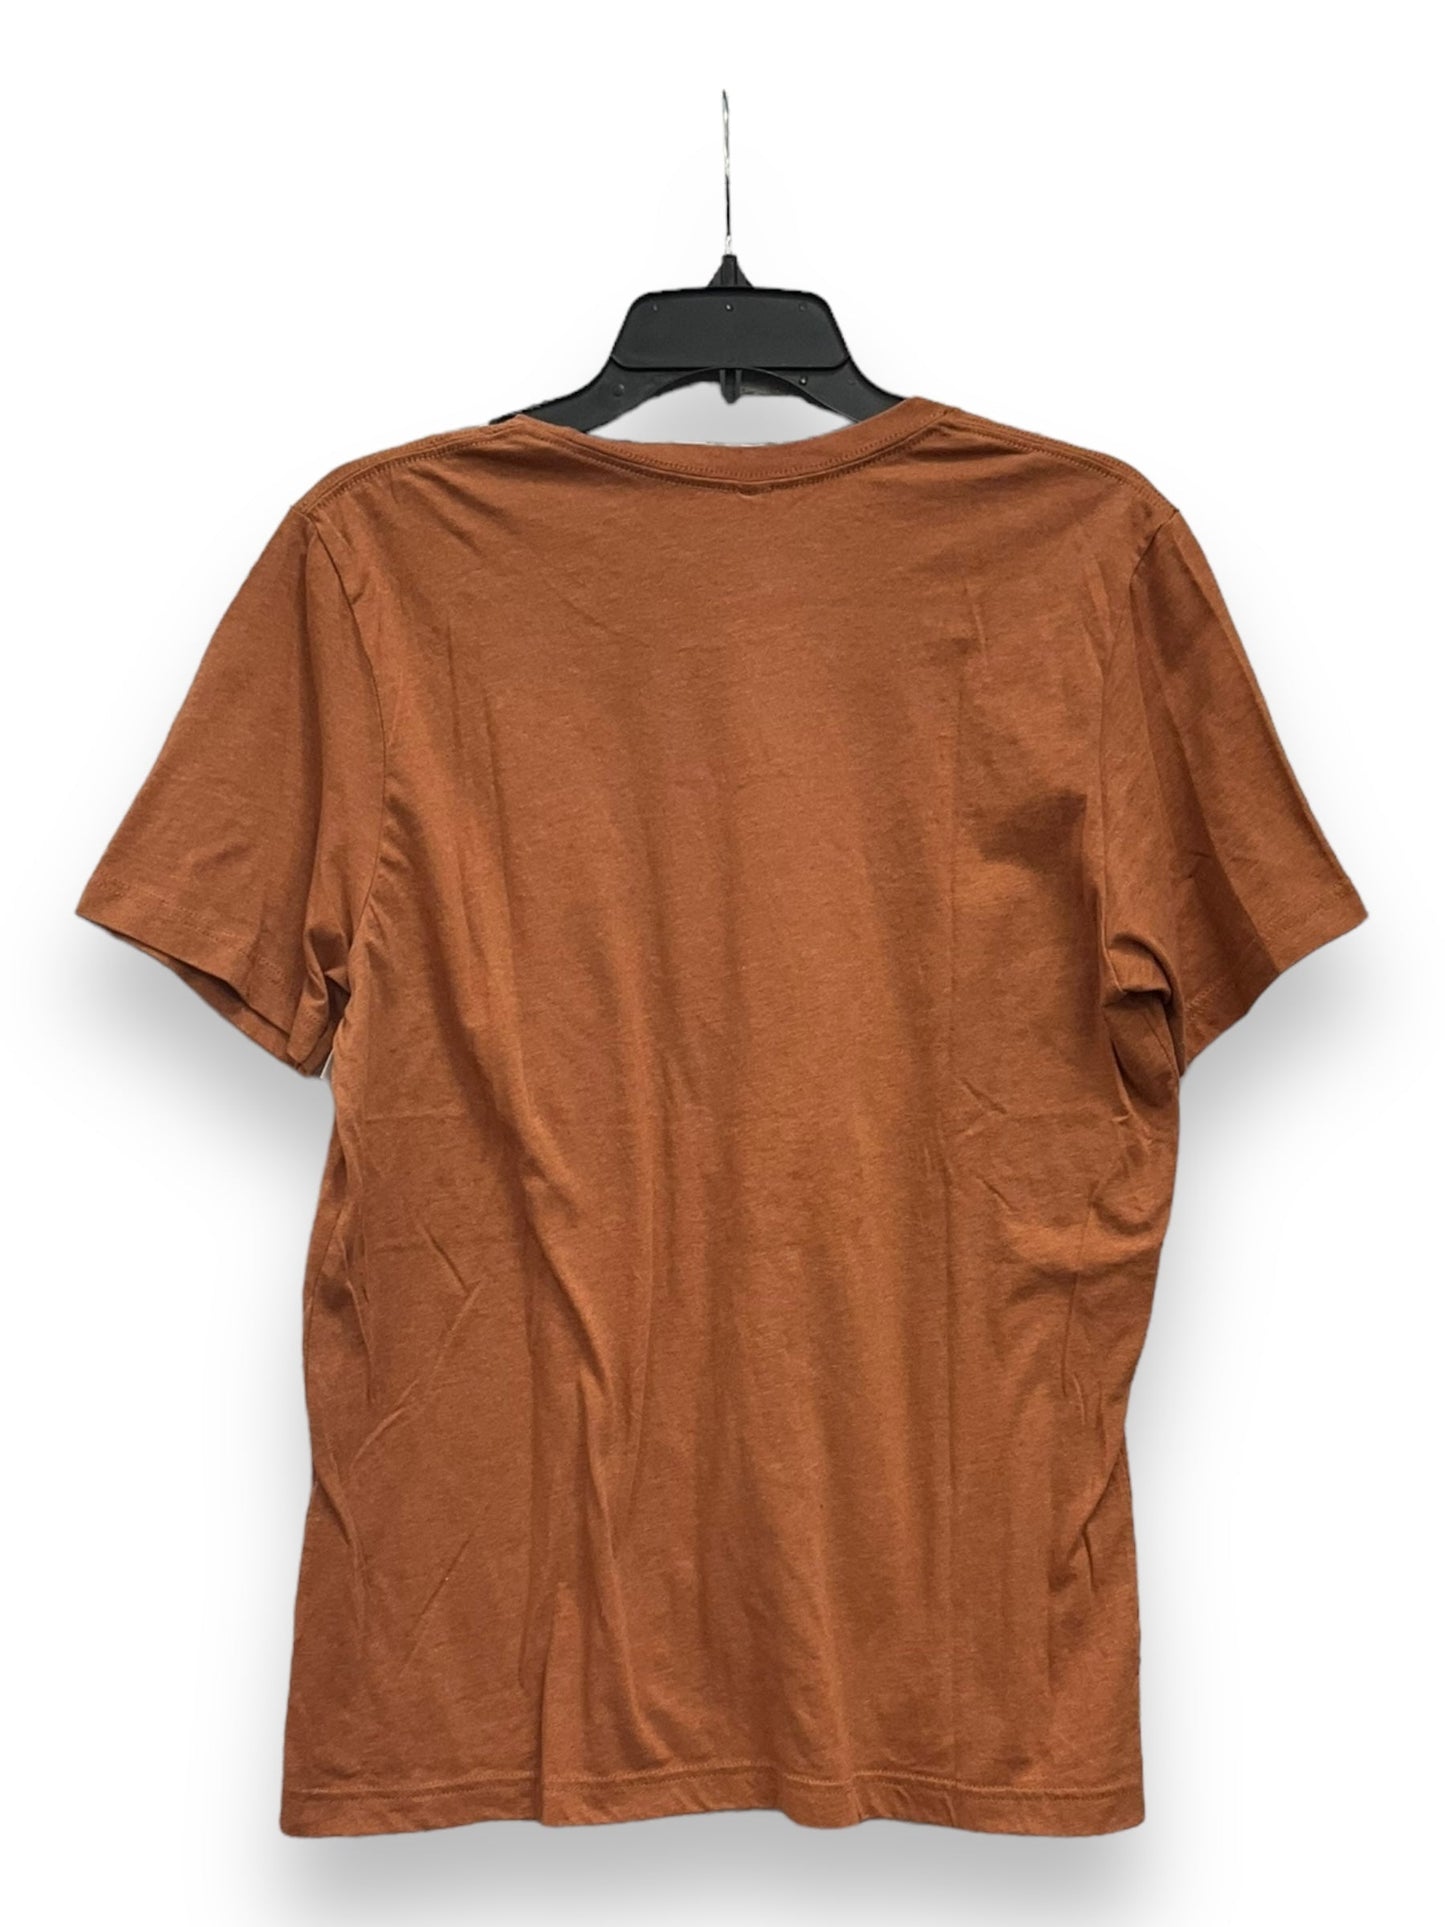 Brown Top Short Sleeve Basic Bella + Canvas, Size L